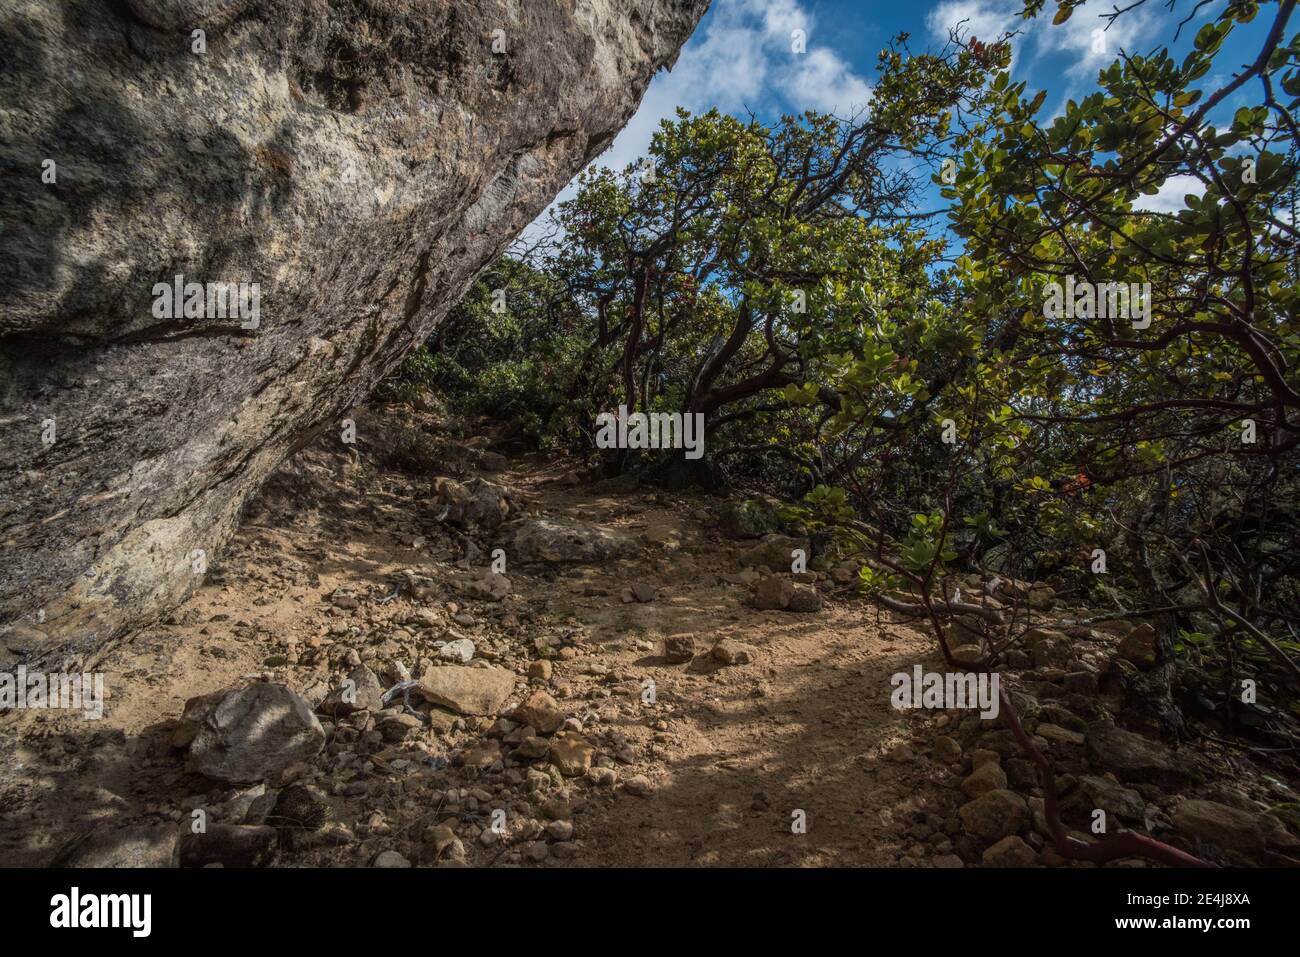 A shaded nook by a boulder and chaparral in the Santa Cruz mountains, in Castle rock state park, California. Stock Photo